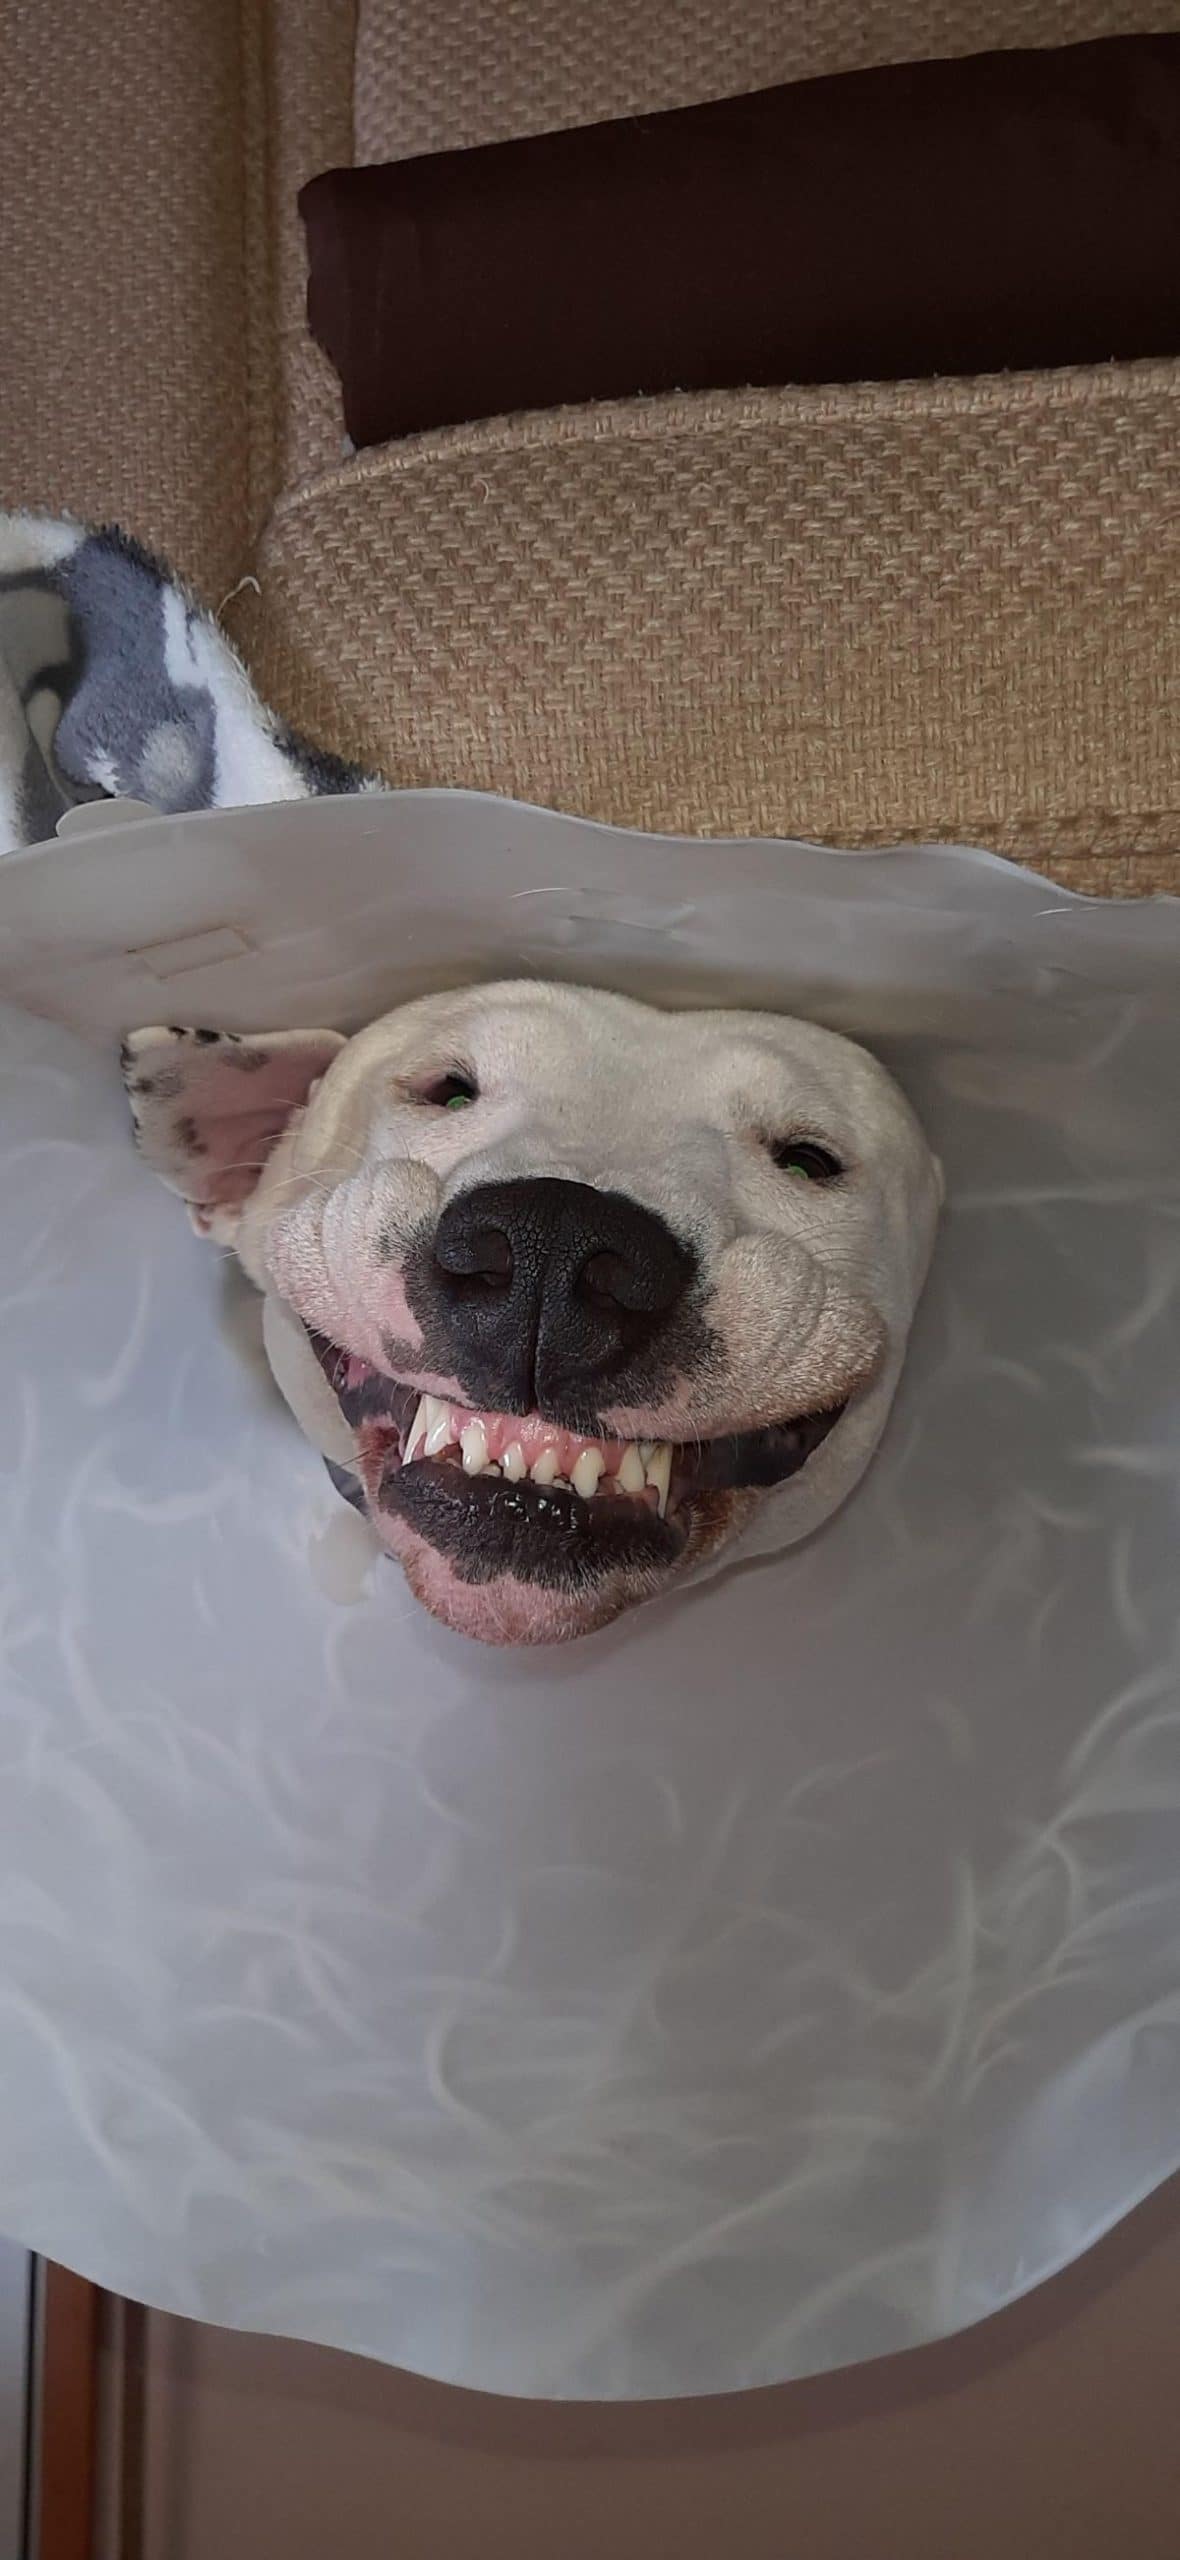 white dog grinning showing teeth while wearing a cone around the head